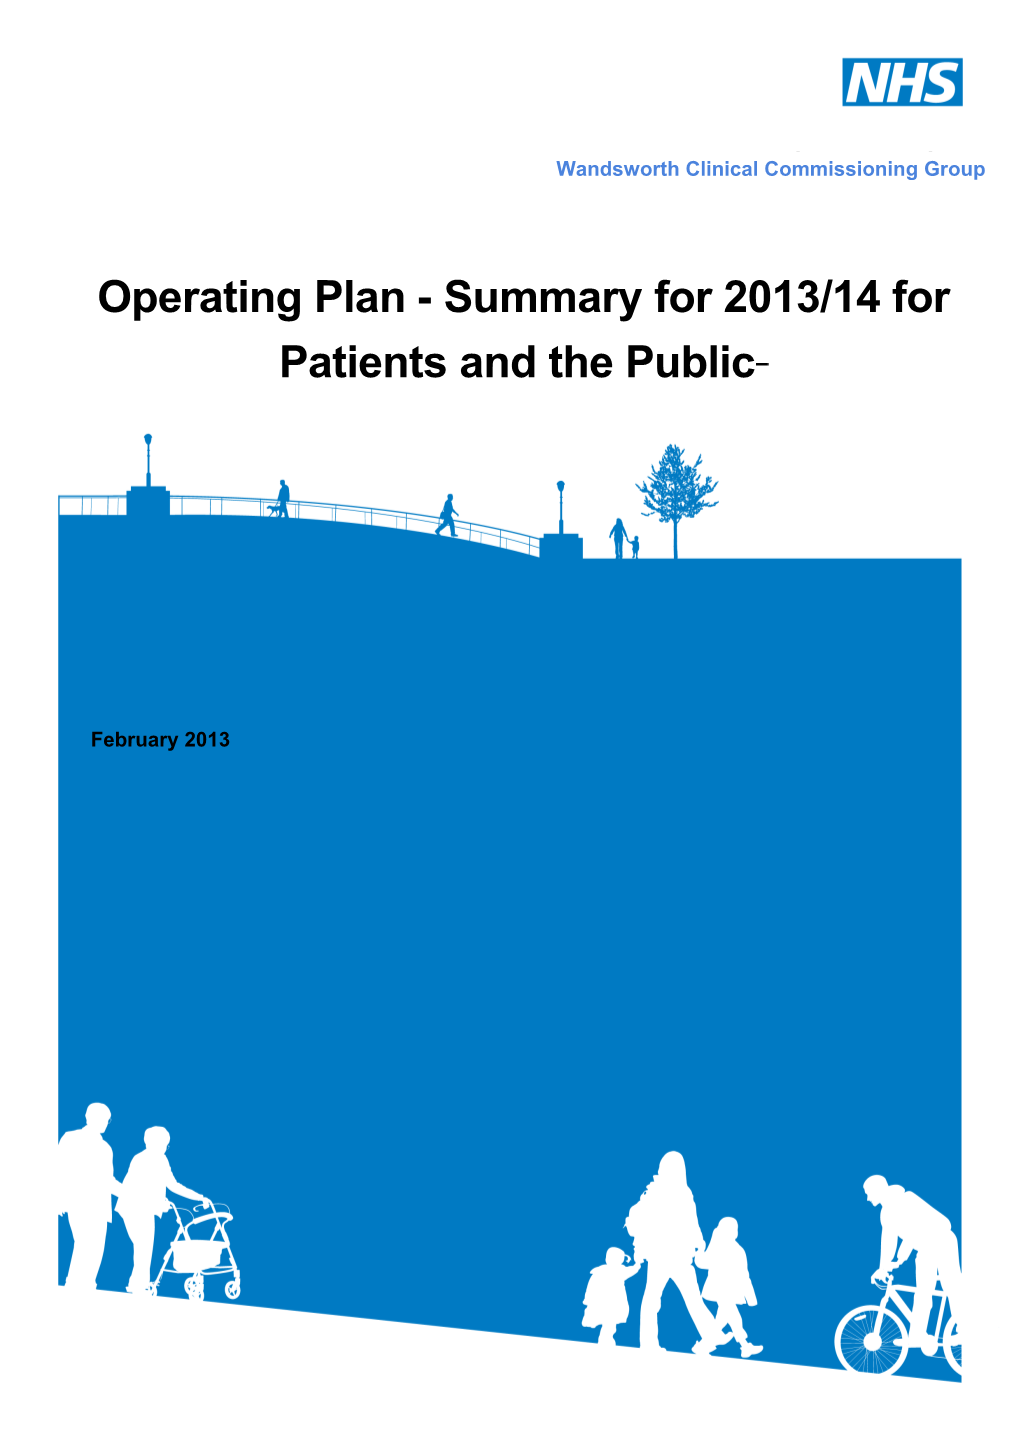 Operating Plan 2013-2014 - Summary for Patients